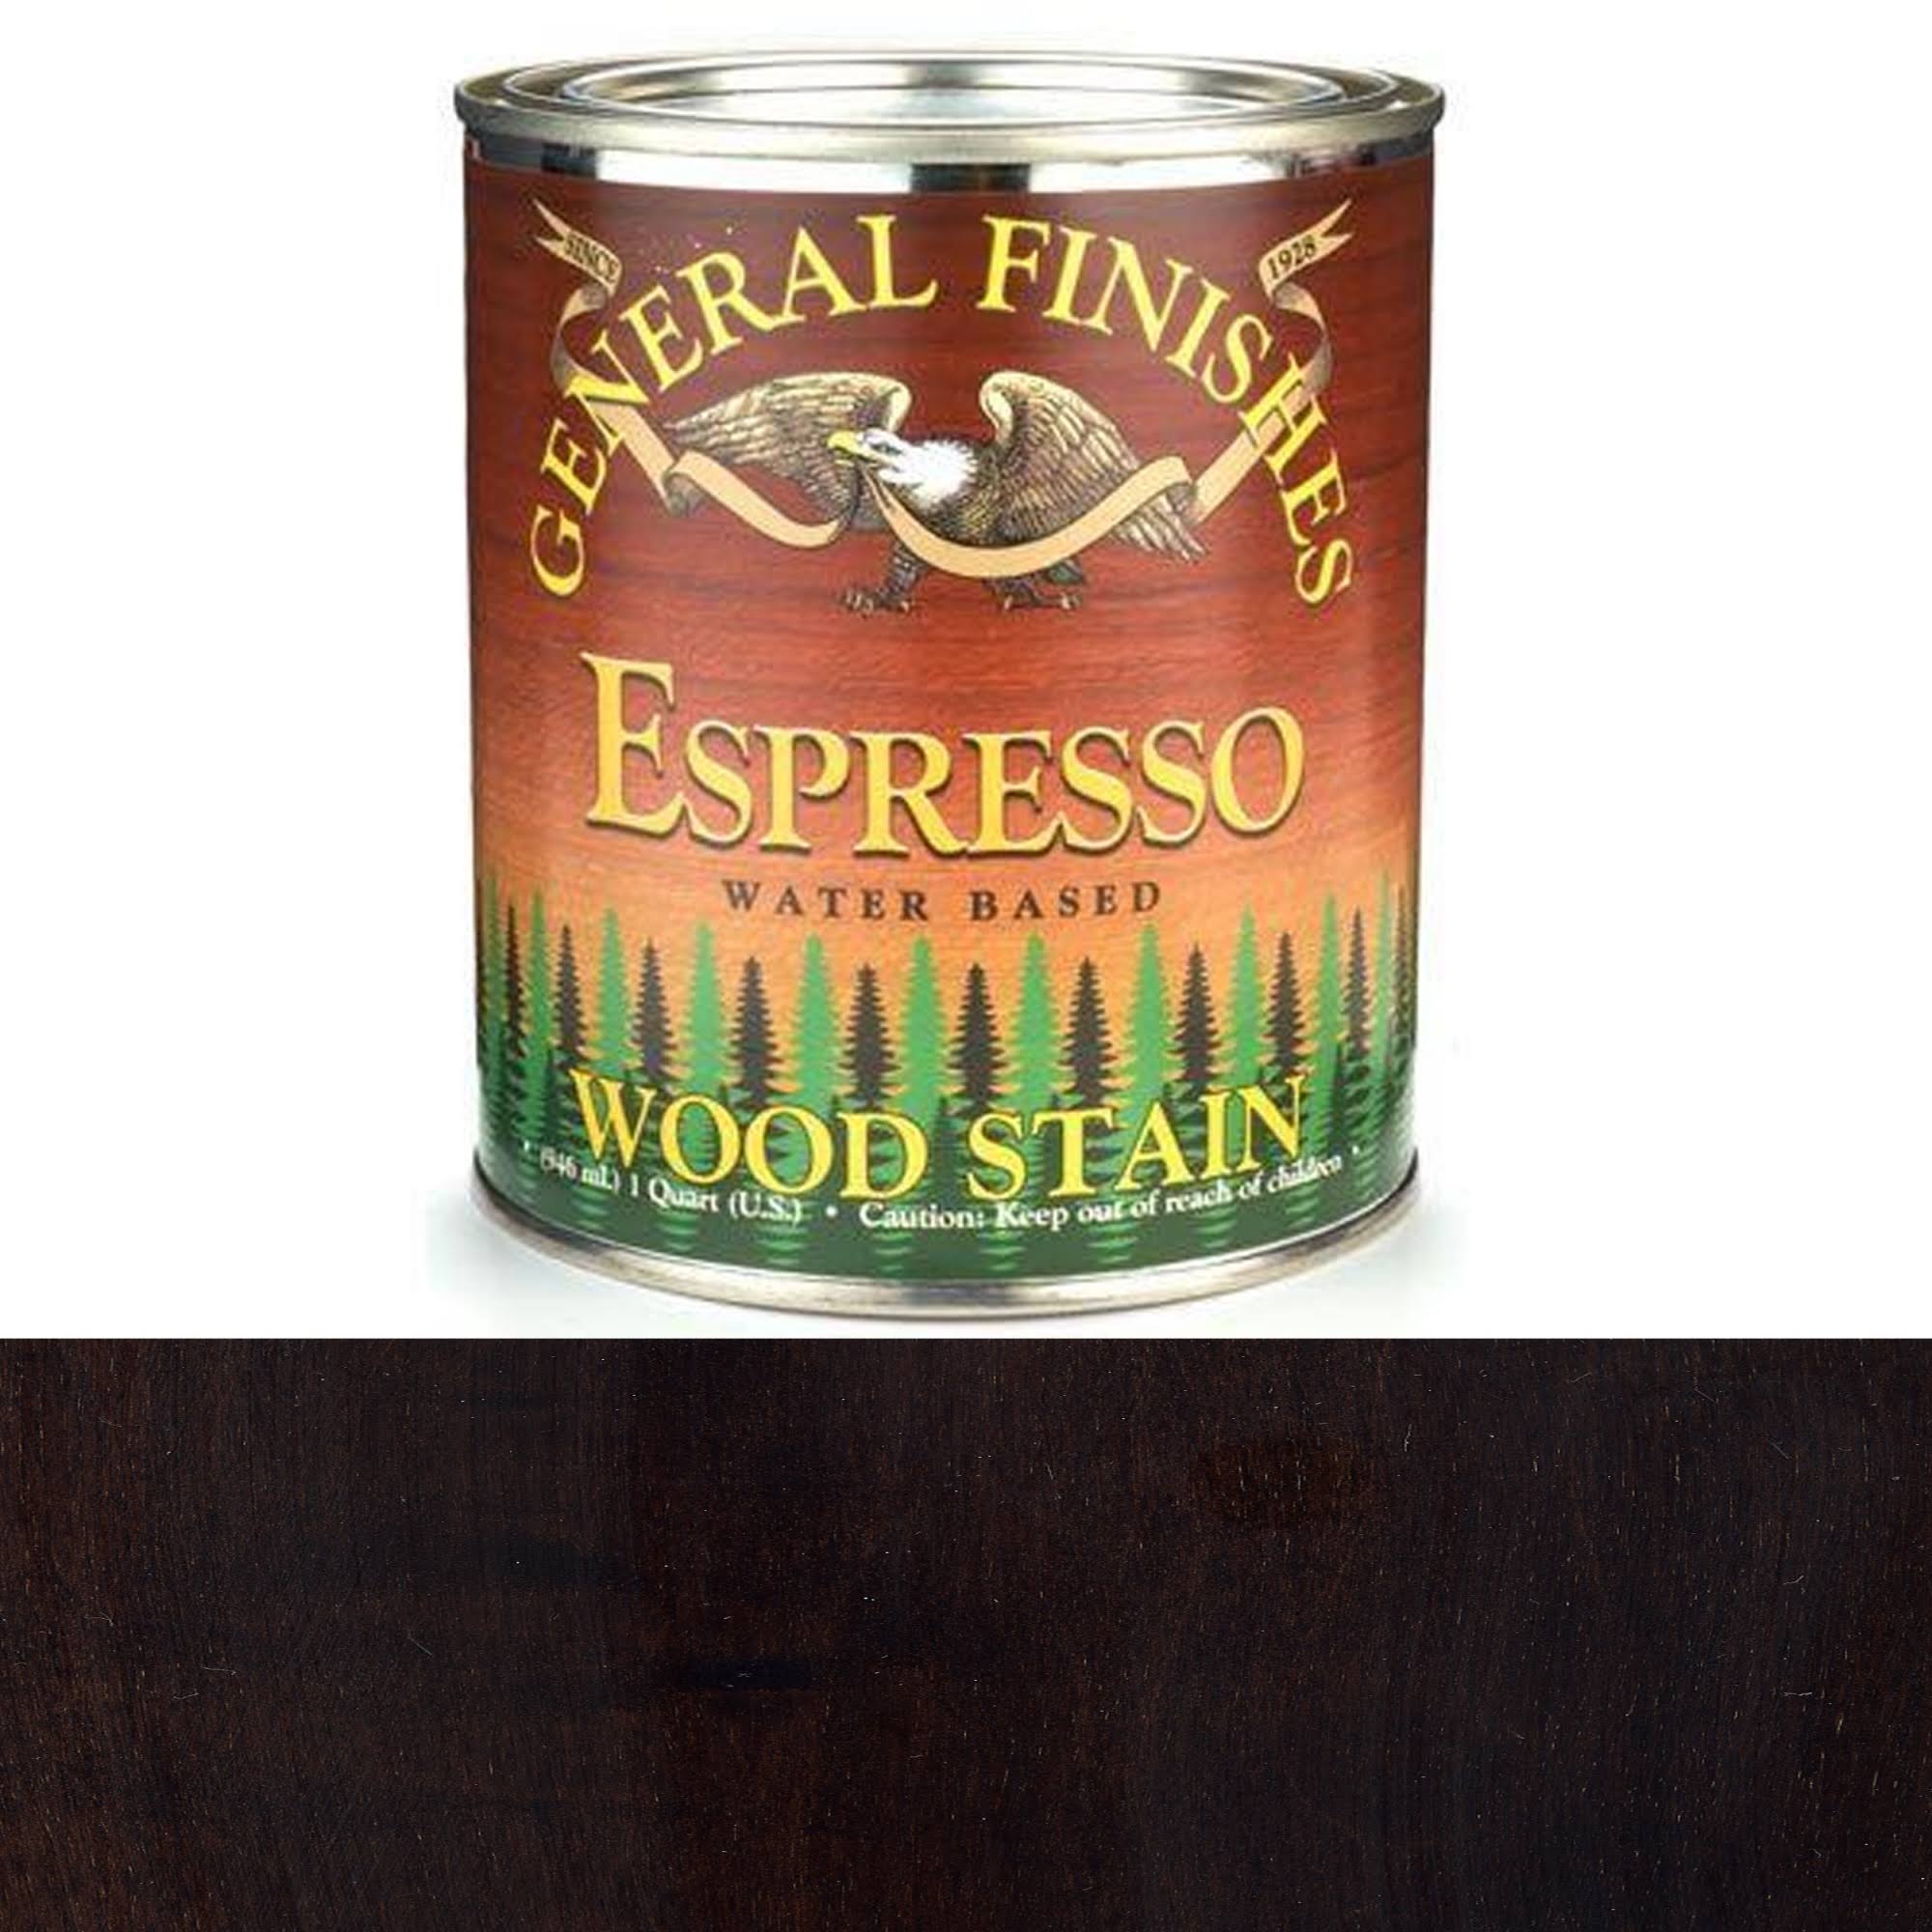 General Finishes Water Based Wood Stain - Espresso, 1 Quart